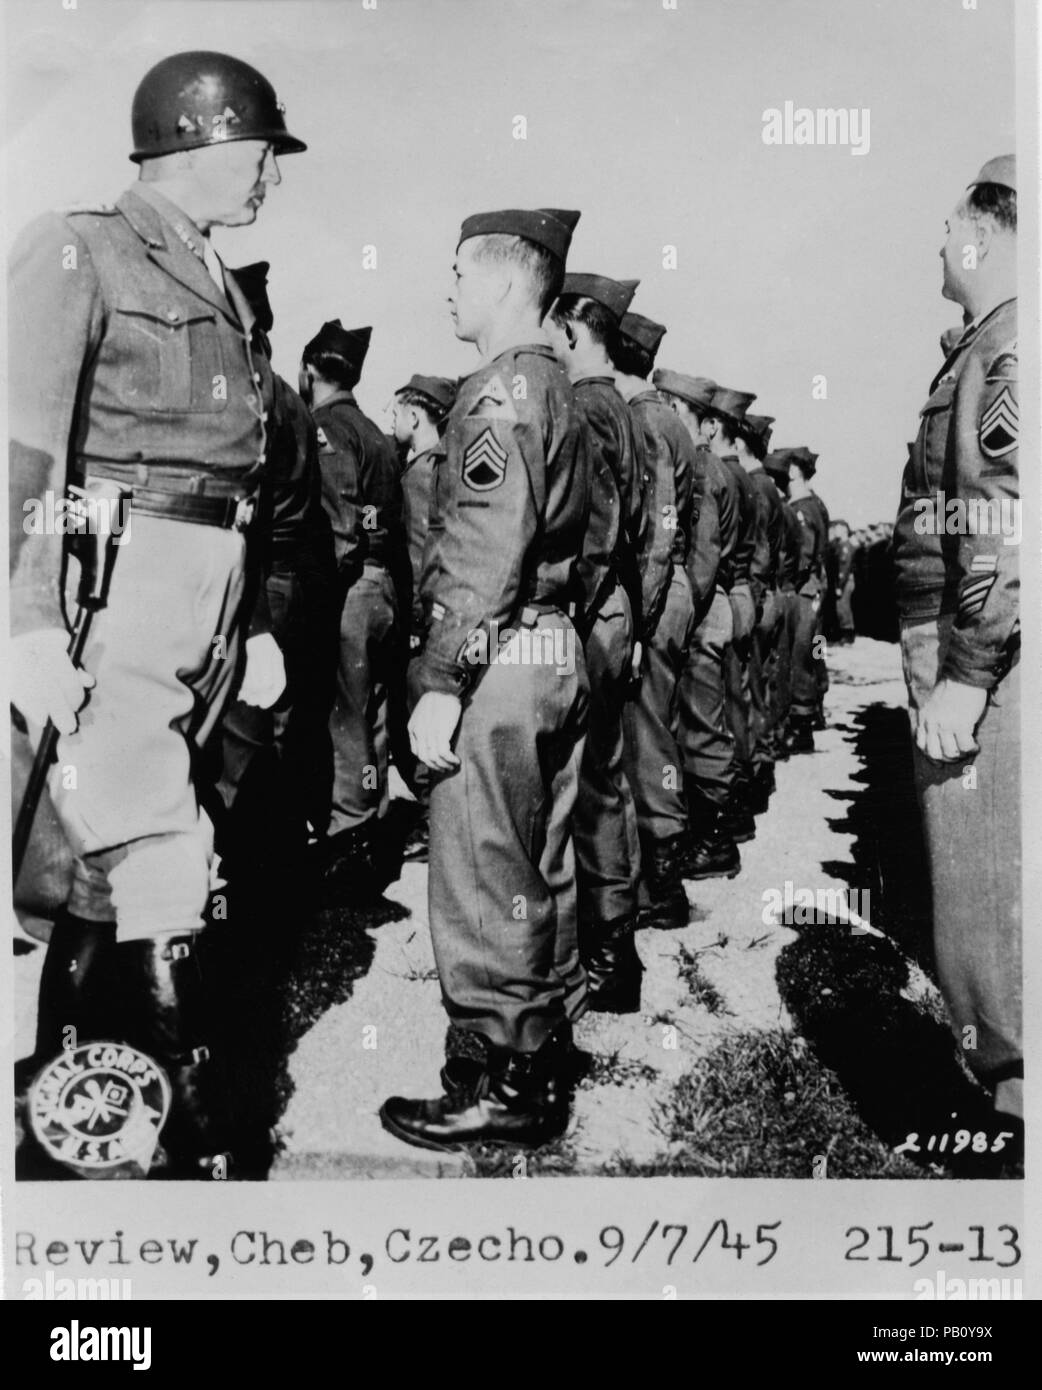 U.S. General George Patton Reviewing Troops, Cheb, Czechoslovakia, September 7, 1945 Stock Photo